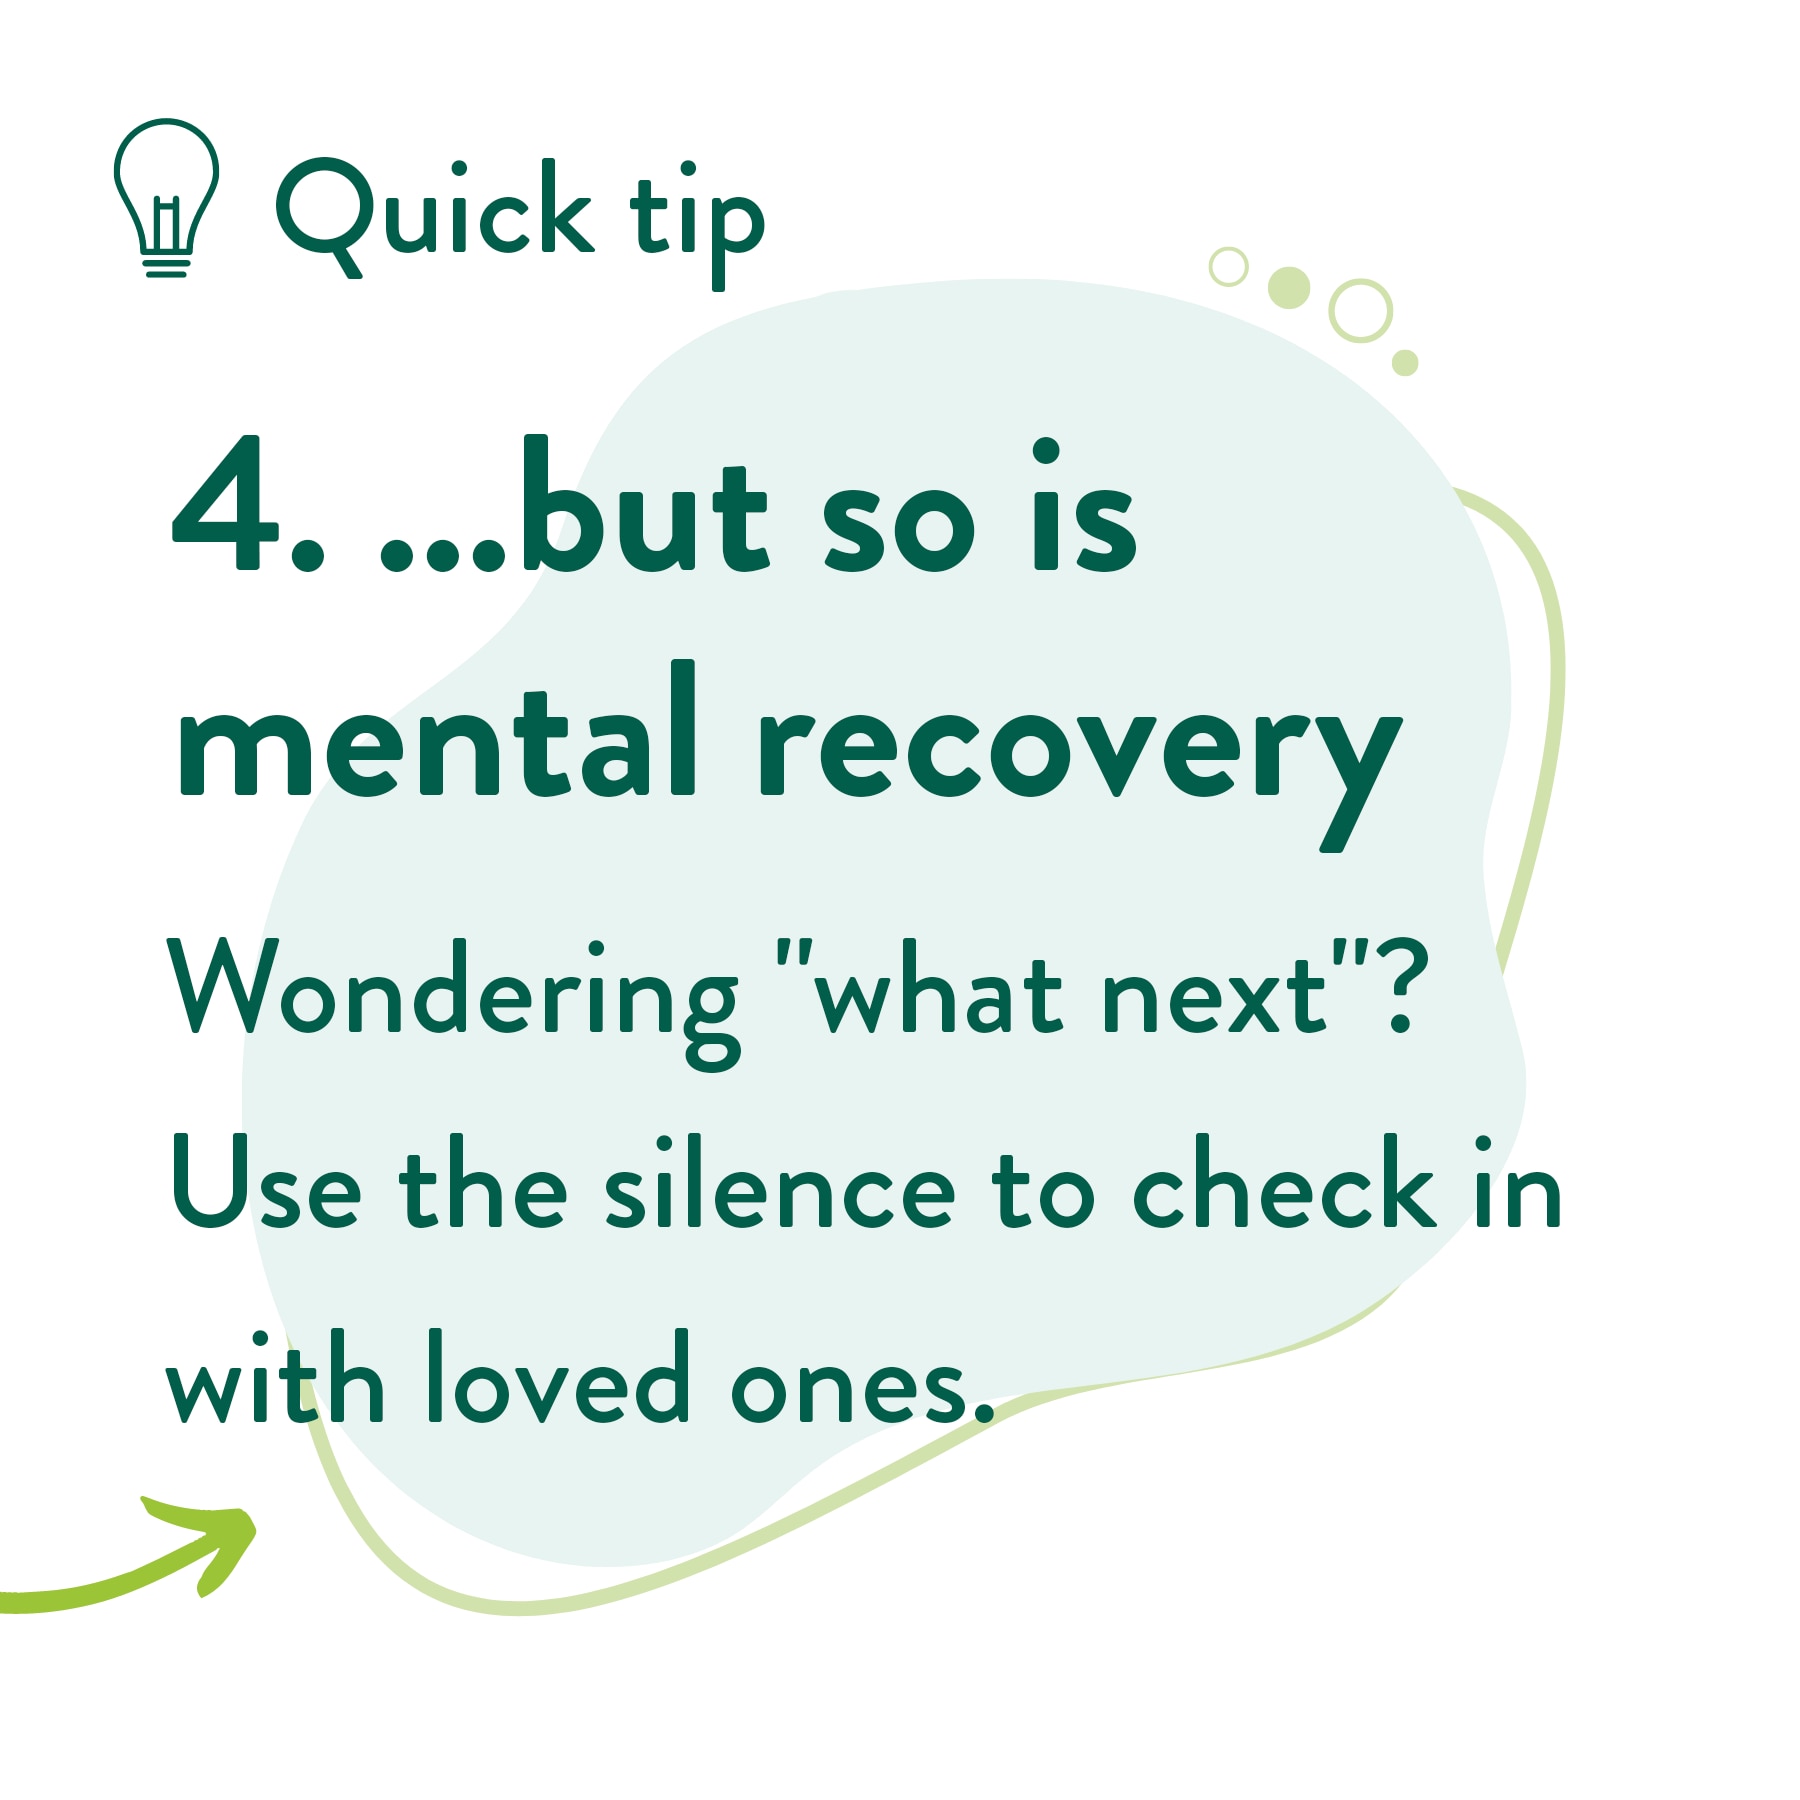 but so is mental recovery Wondering "what next"? Use the silence to check in with loved ones.